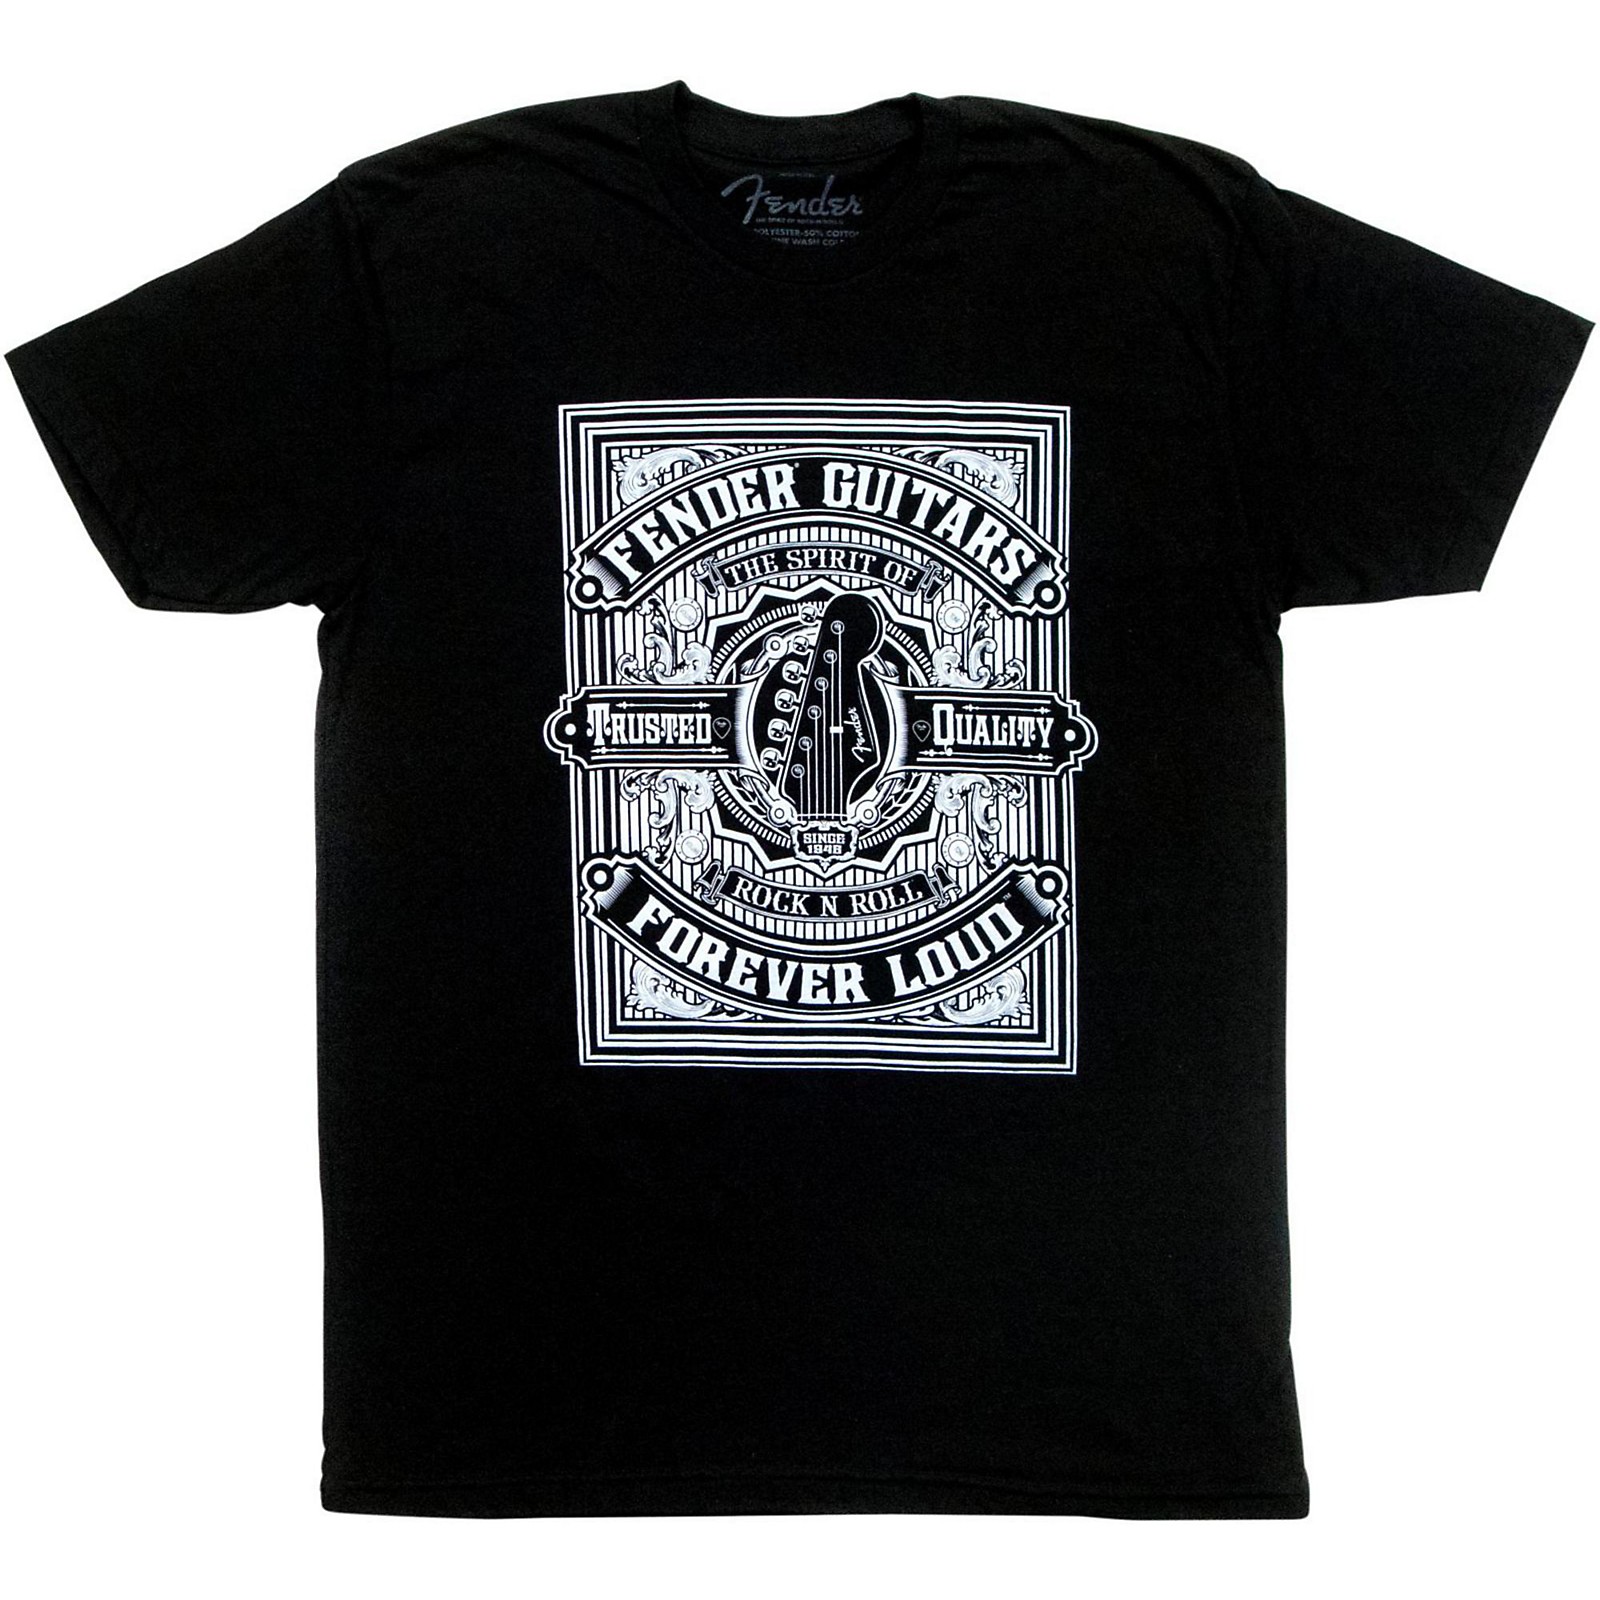 Fender Forever Loud Trusted Quality T-Shirt Black Large | Musician's Friend